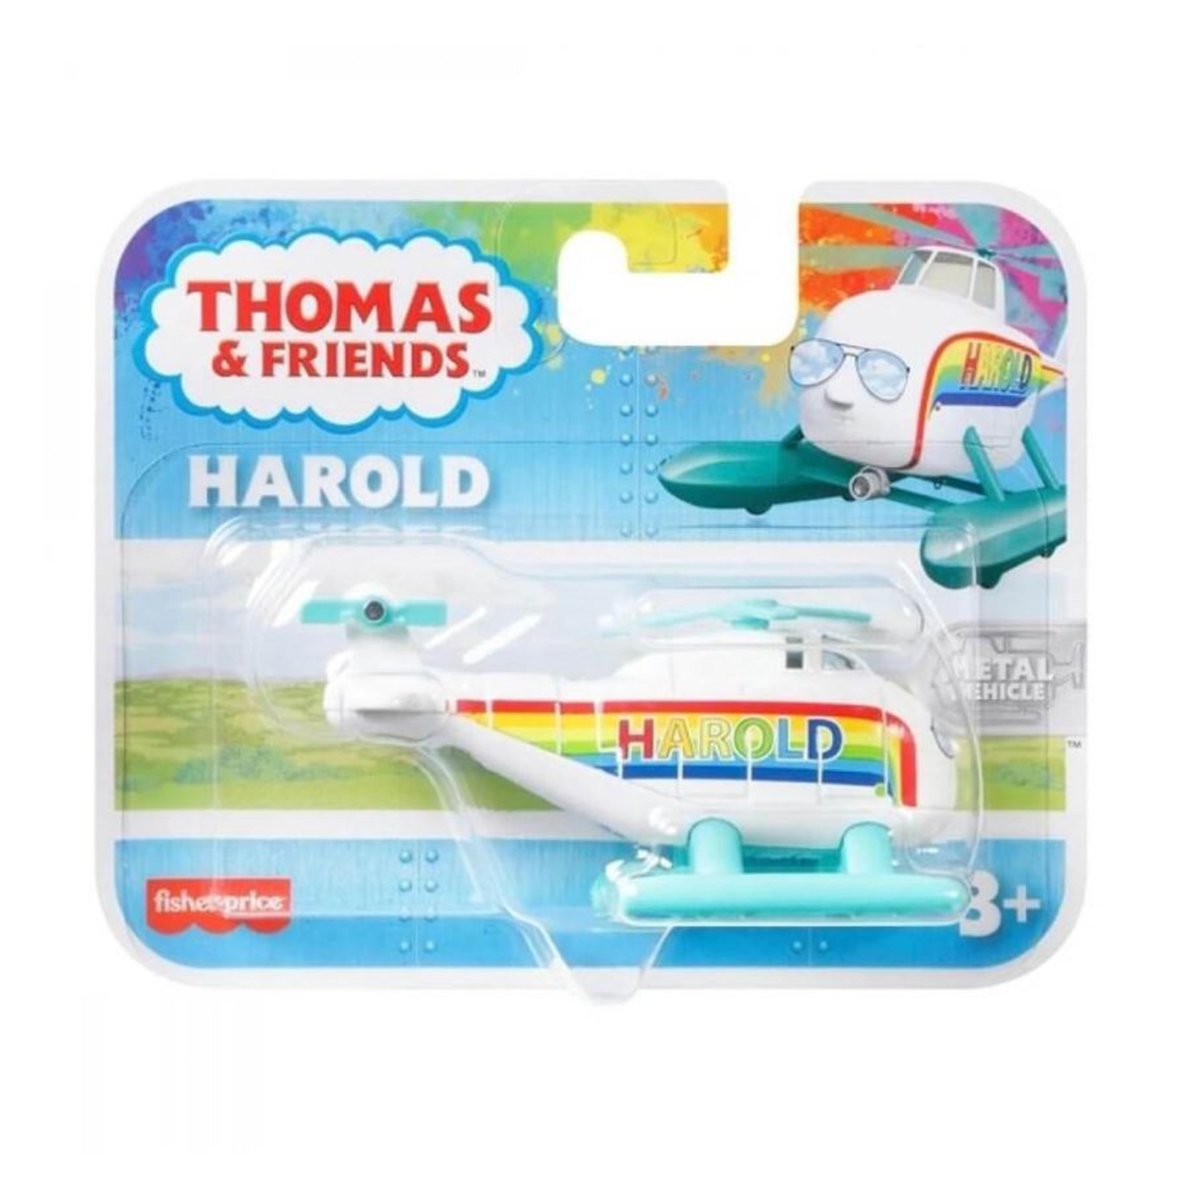 Elicopterul Harold, Thomas and Friends, GYV67 noriel.ro